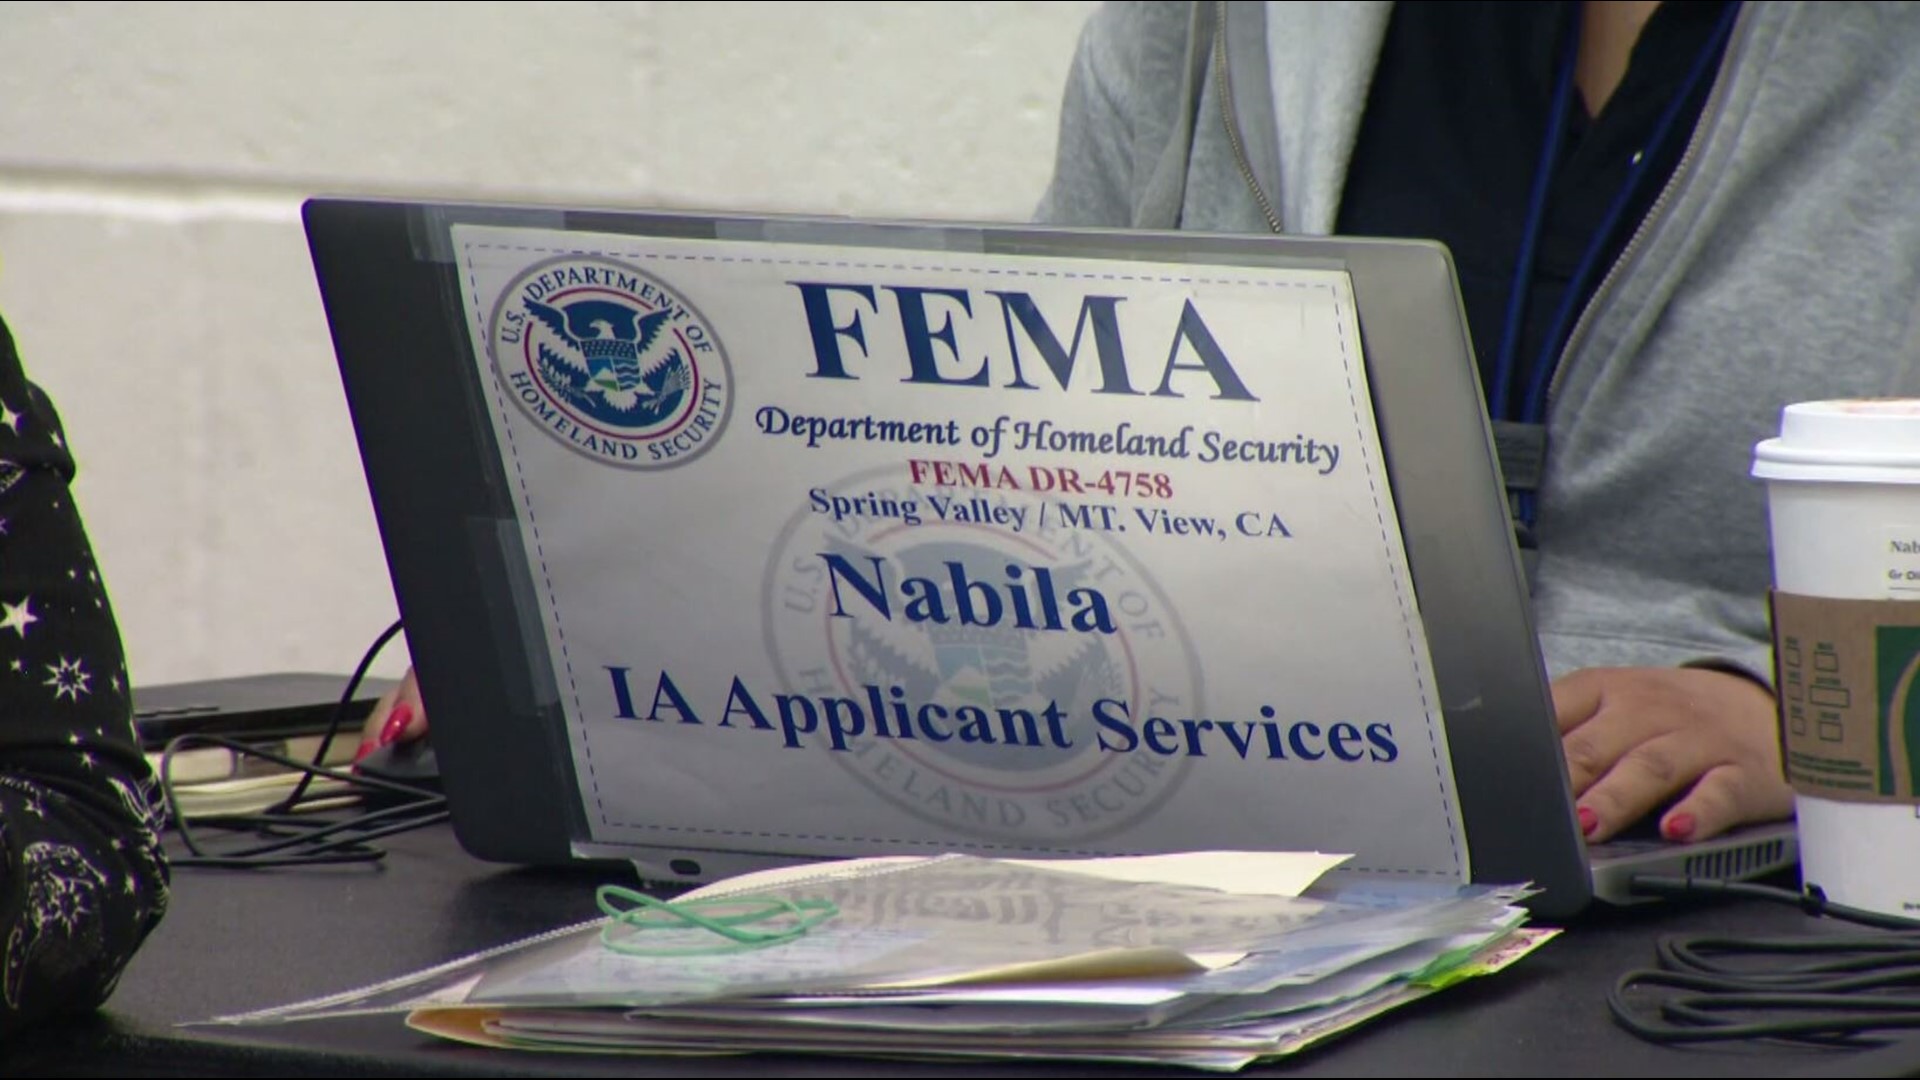 The deadline to submit applications to FEMA for assistance with flood damage repair is Friday, April 19 at midnight online and 7 p.m. in-person.